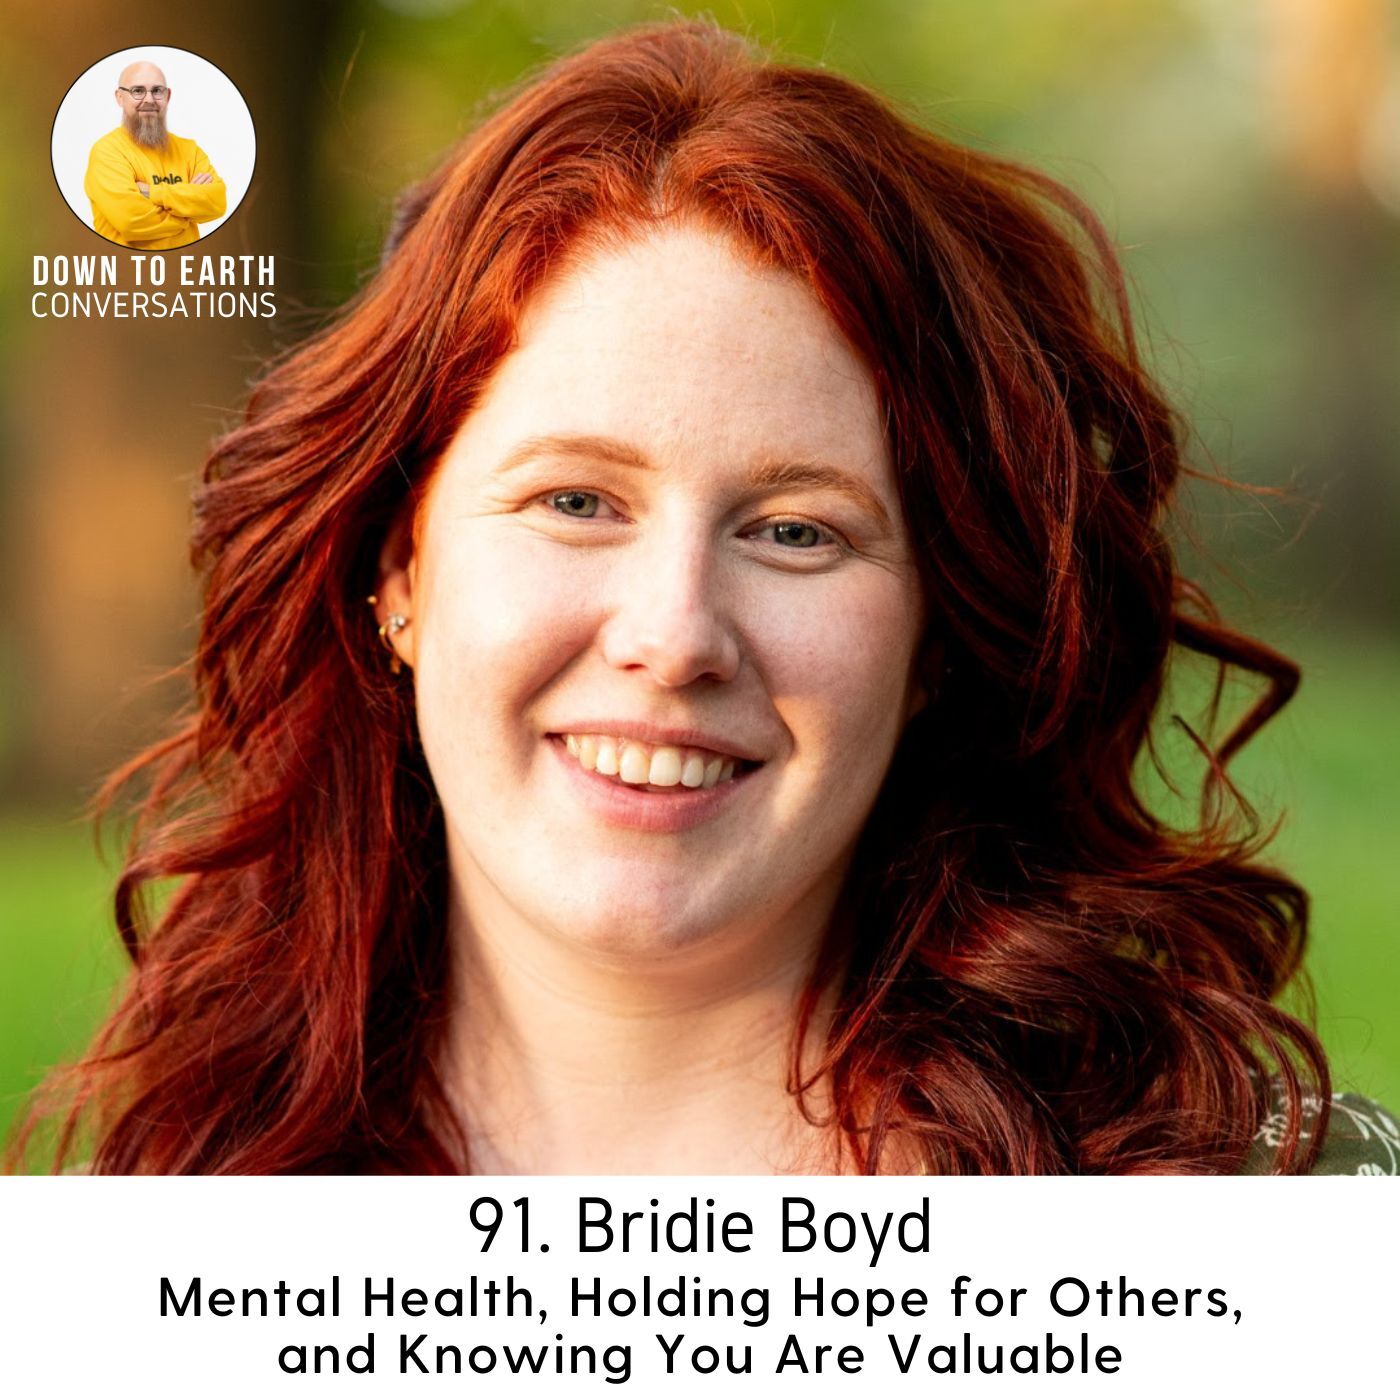 91. Bridie Boyd - Mental Health, Holding Hope for Others, and Knowing You Are Valuable